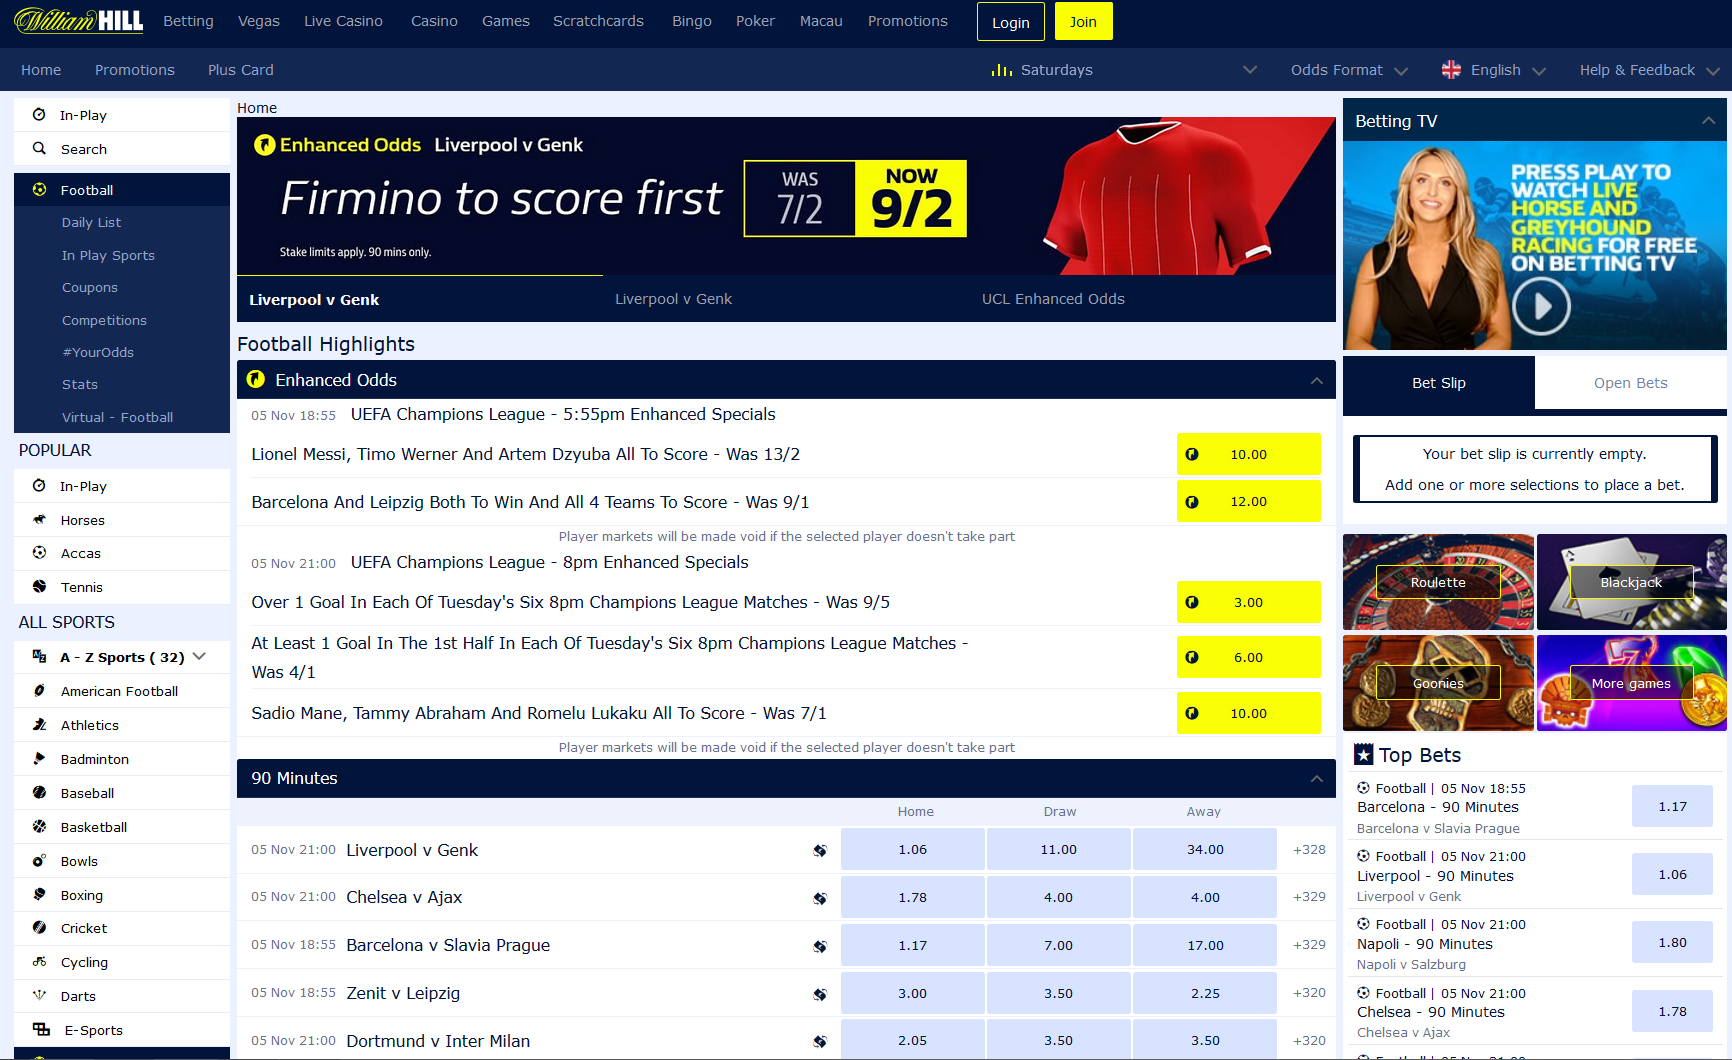 william hill bookmaker betting offer